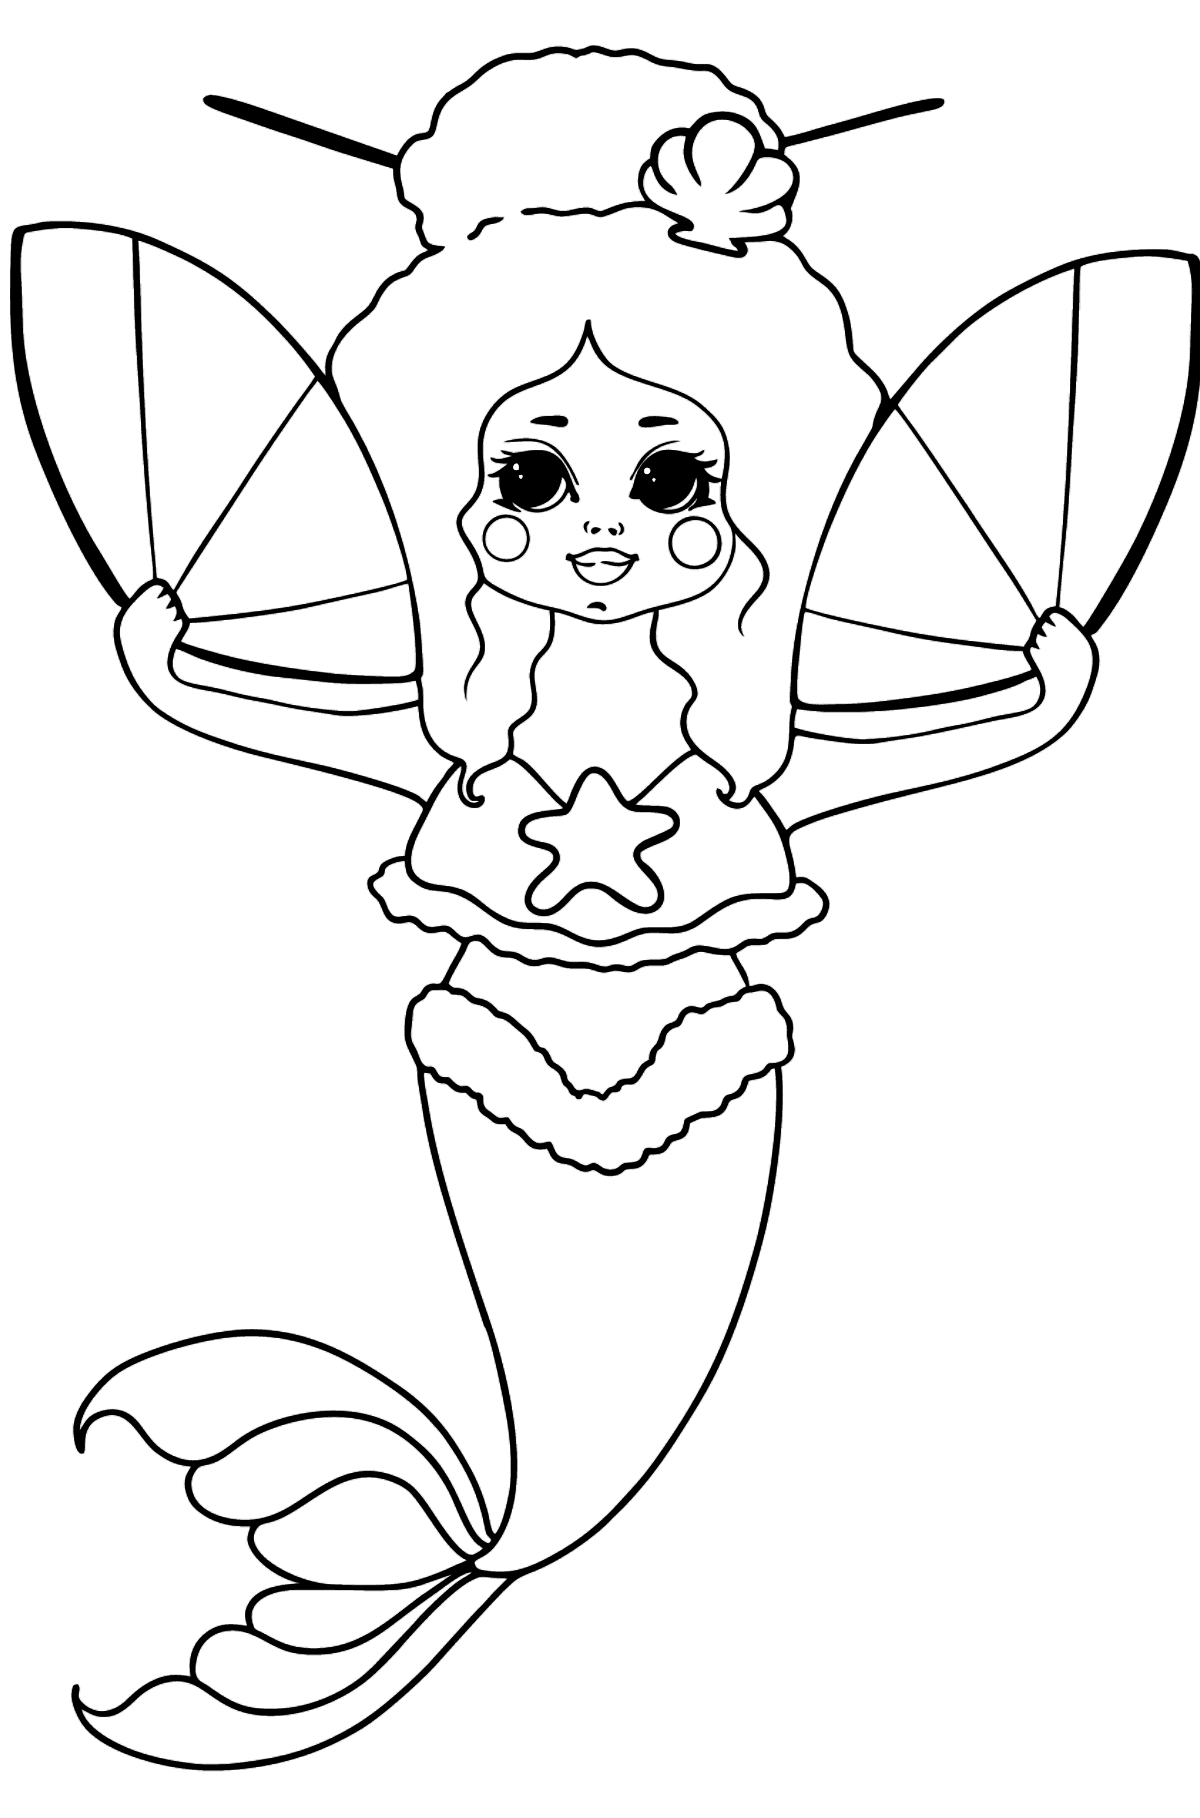 Mermaid and Two Fans coloring page - Coloring Pages for Kids